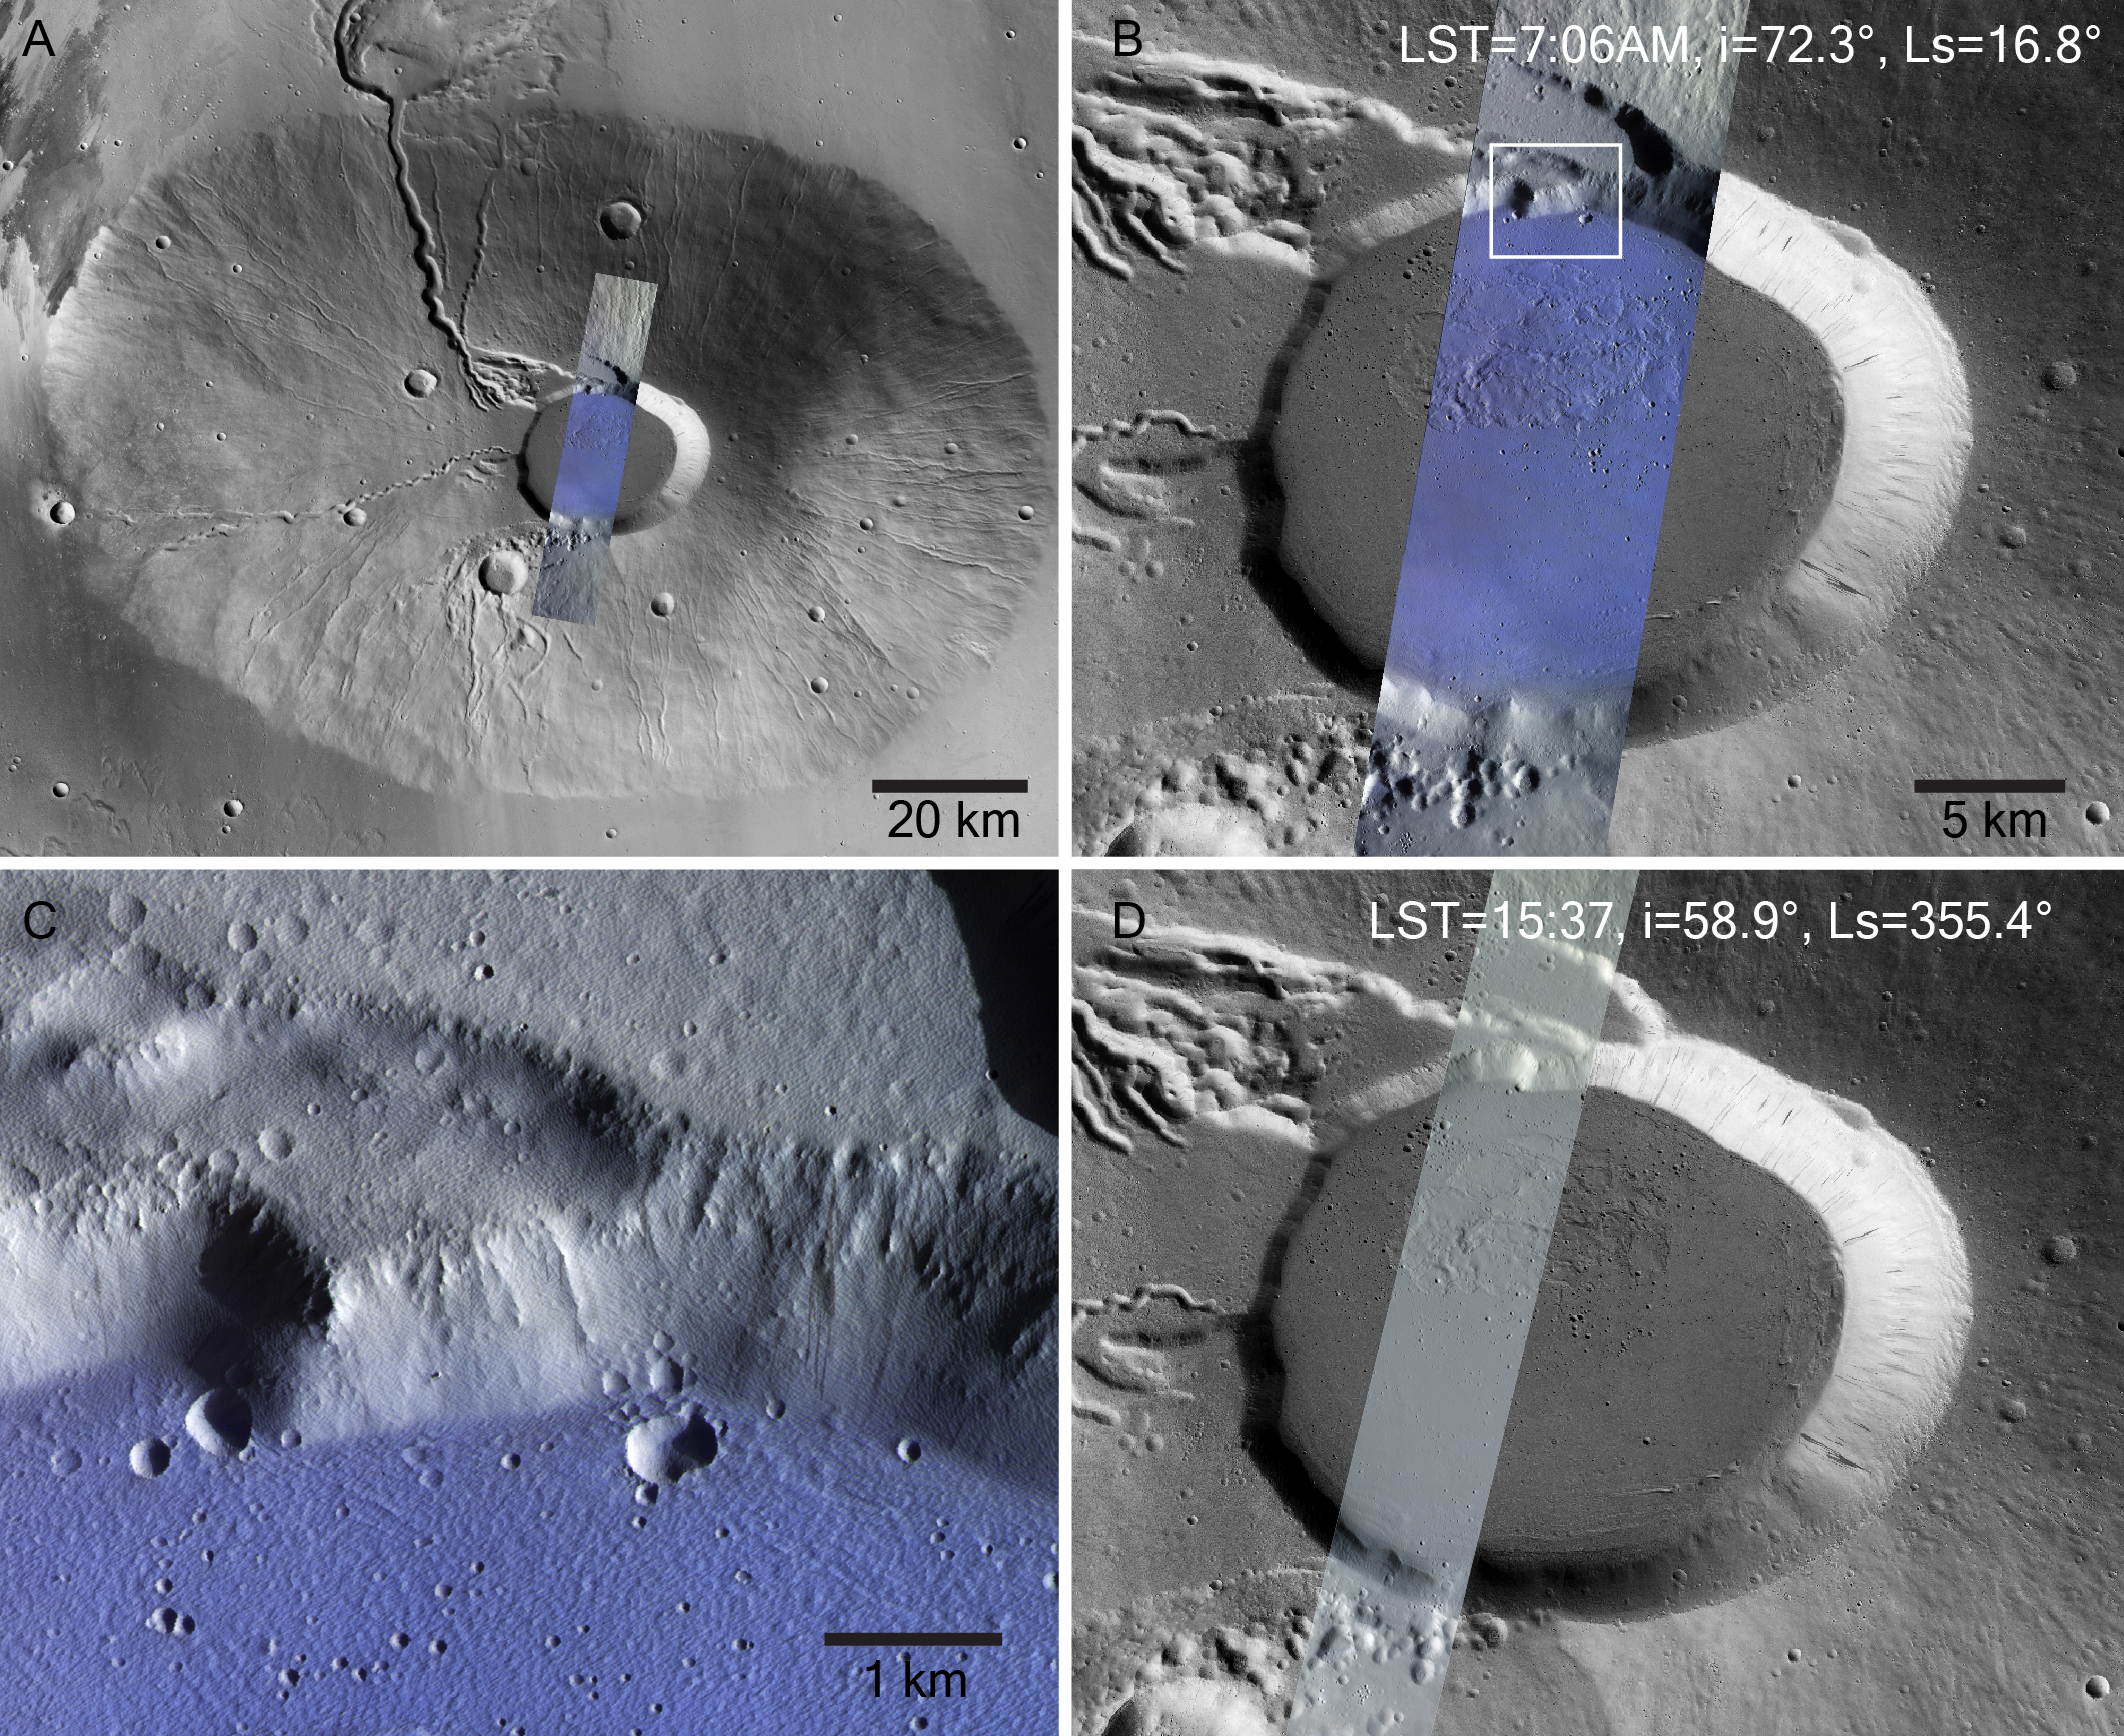 Frost on the caldera floor of the Ceraunius Tholus volcano. The frames show (A) a view of Ceraunius Tholus from NASA’s Mars Reconnaissance Orbiter’s Context Camera, with early morning observations made by CaSSIS overlaid within the blue-toned rectangle. This rectangle is shown close-up in frame (B). The white rectangle marking out an even more zoomed-in image is shown in frame (C). It shows ubiquitous frost on the caldera floor, but none on the caldera rim. (D) shows a CaSSIS image of the same region acquired at a different time of day, when there is no frost present. The frosty regions appear blue due to the way in which CaSSIS constructs its images, using both near-infrared and visible channels. It is a so-called ‘NPB’ image, for which the instrument's near-infrared (N), panchromatic (P) and blue (B) filters are combined.